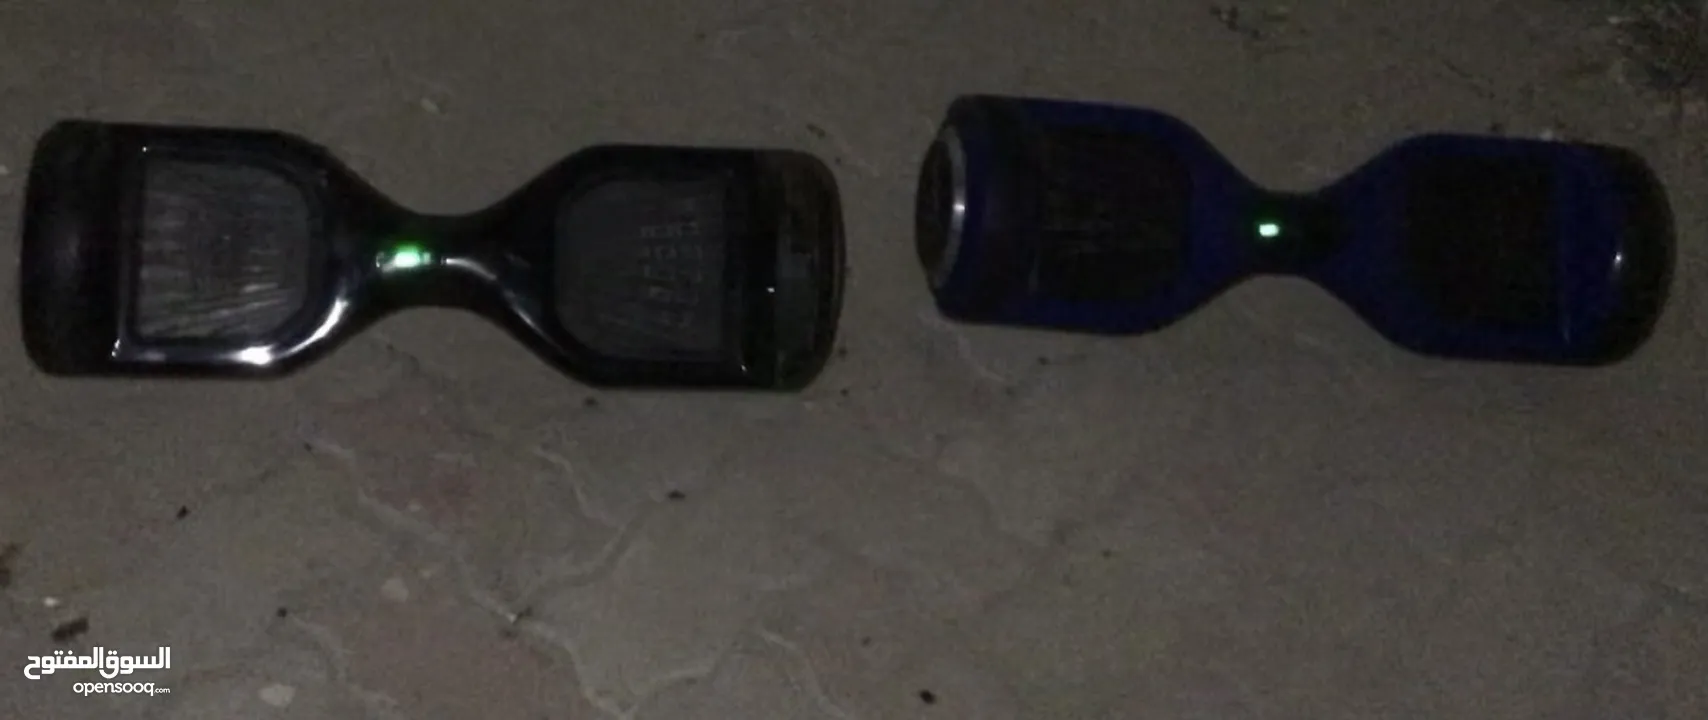 2 hover boards with charger